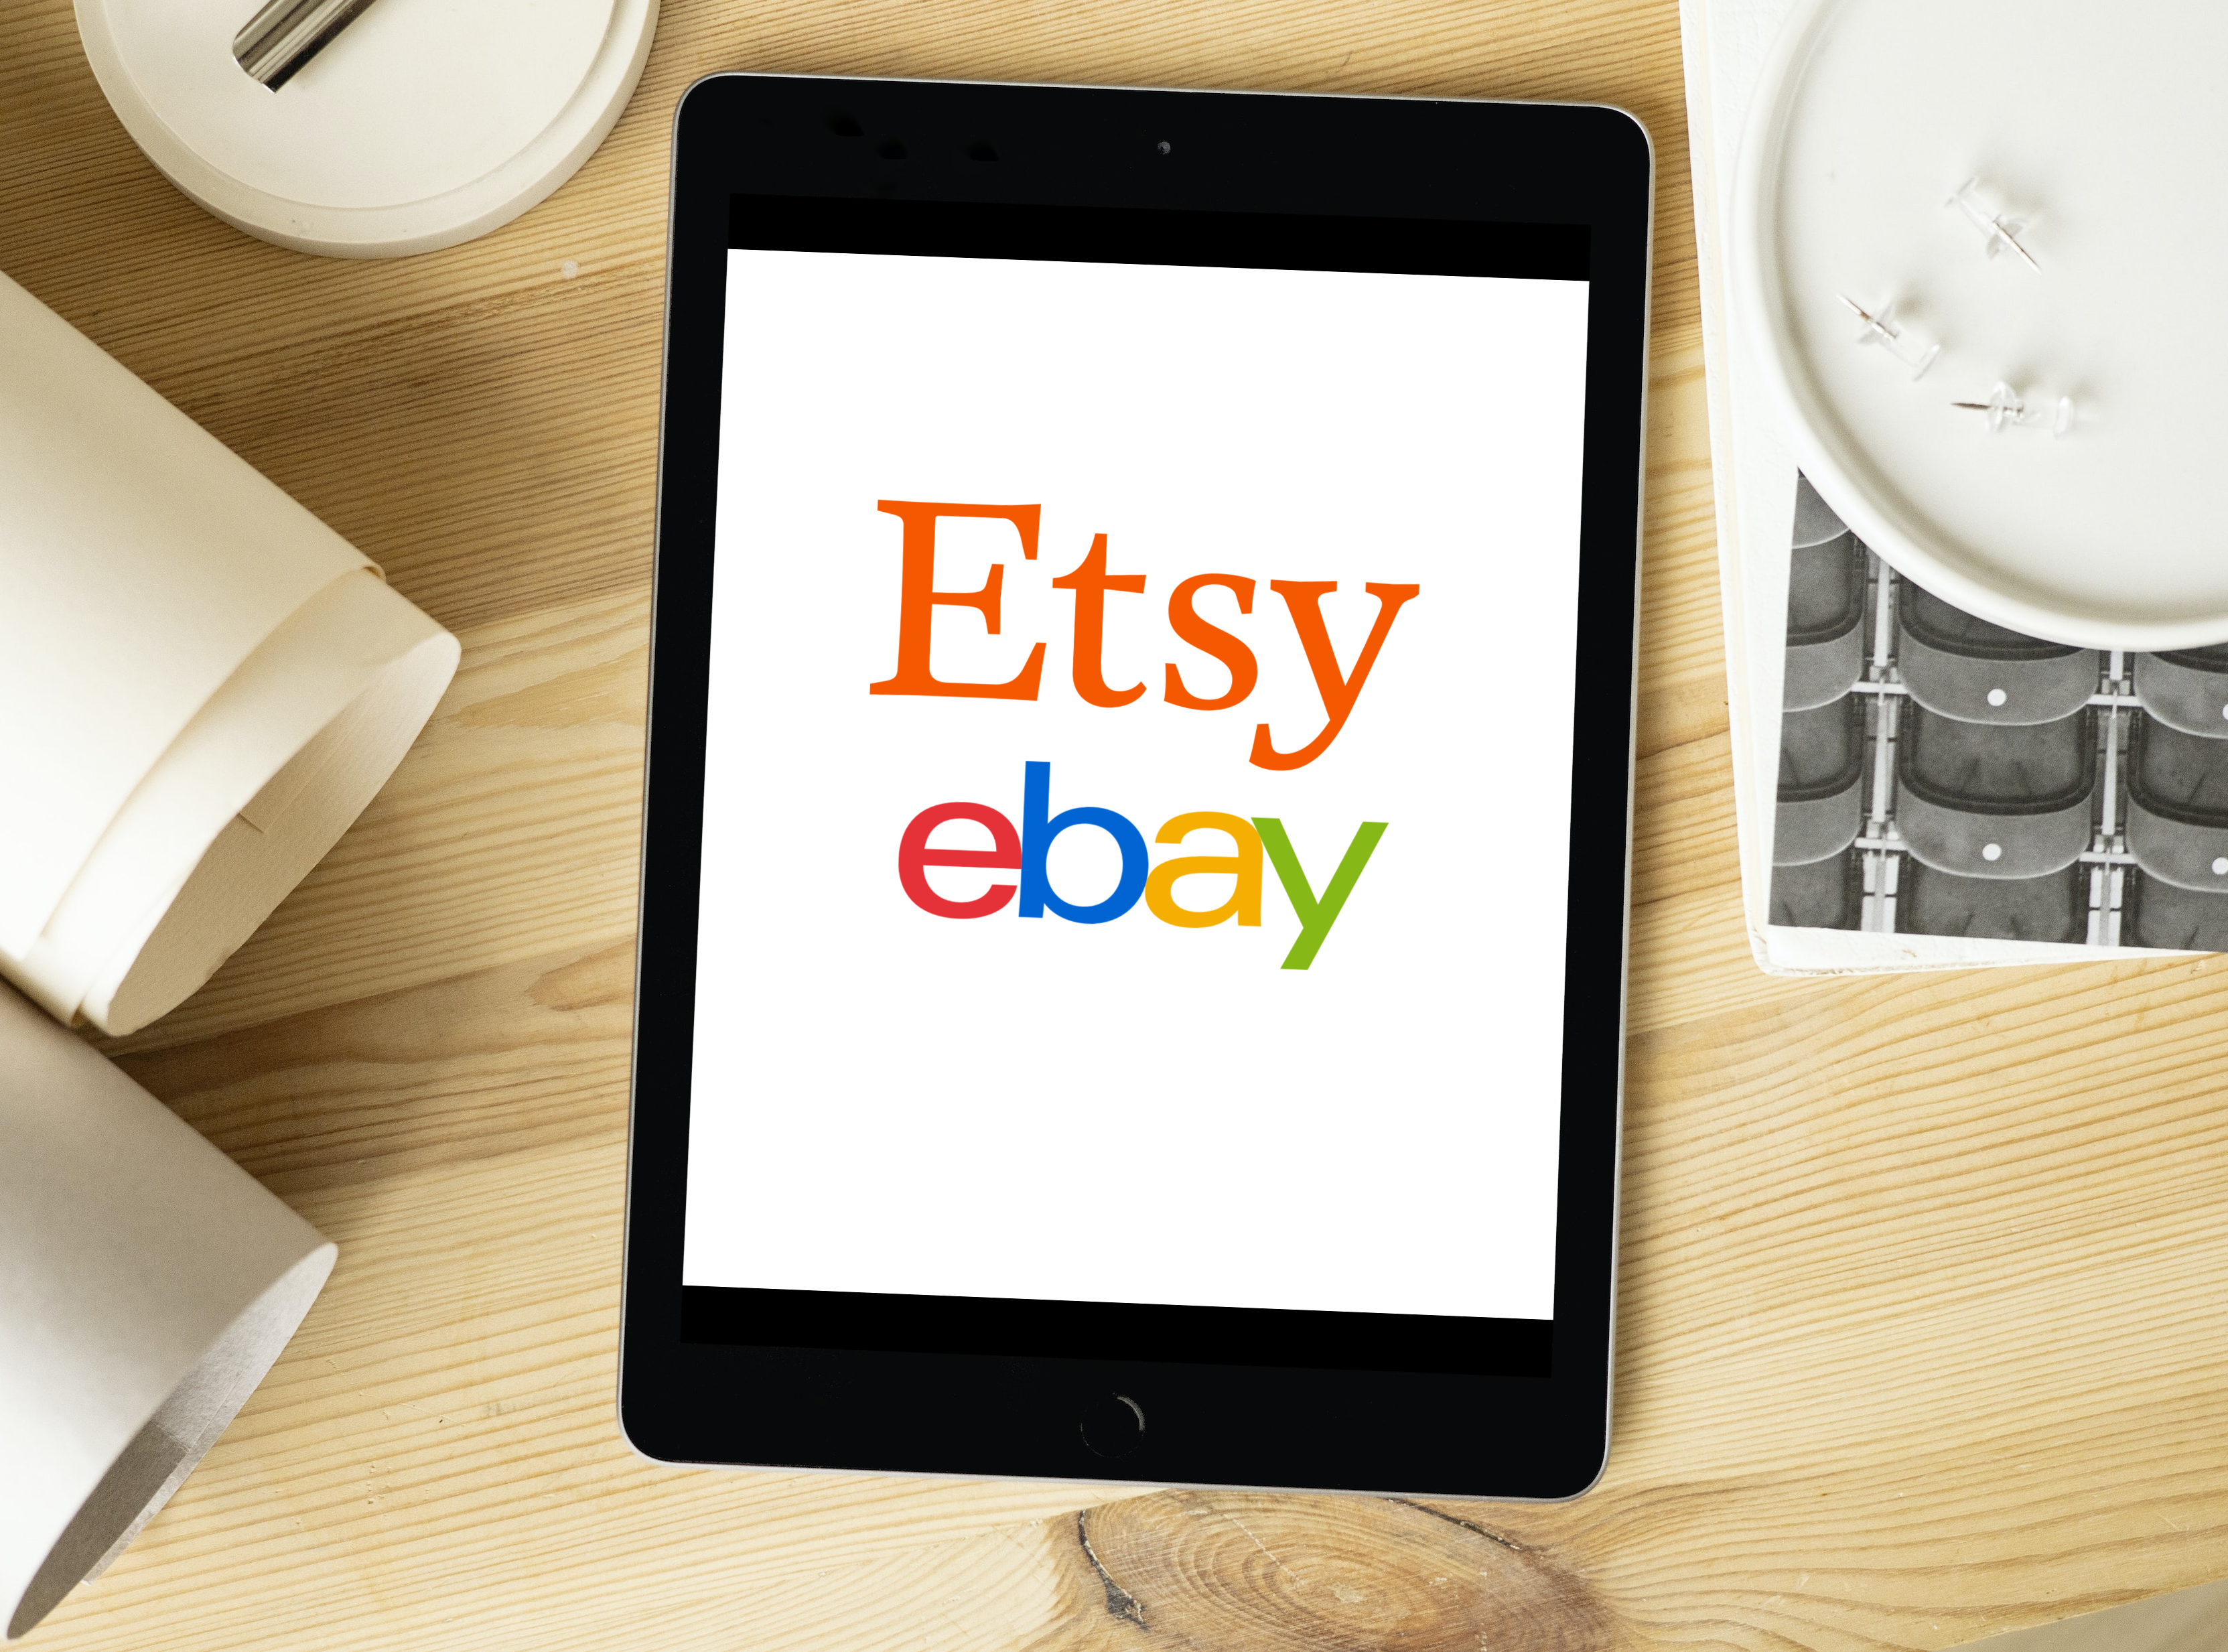 My First Month Selling on Etsy and eBay